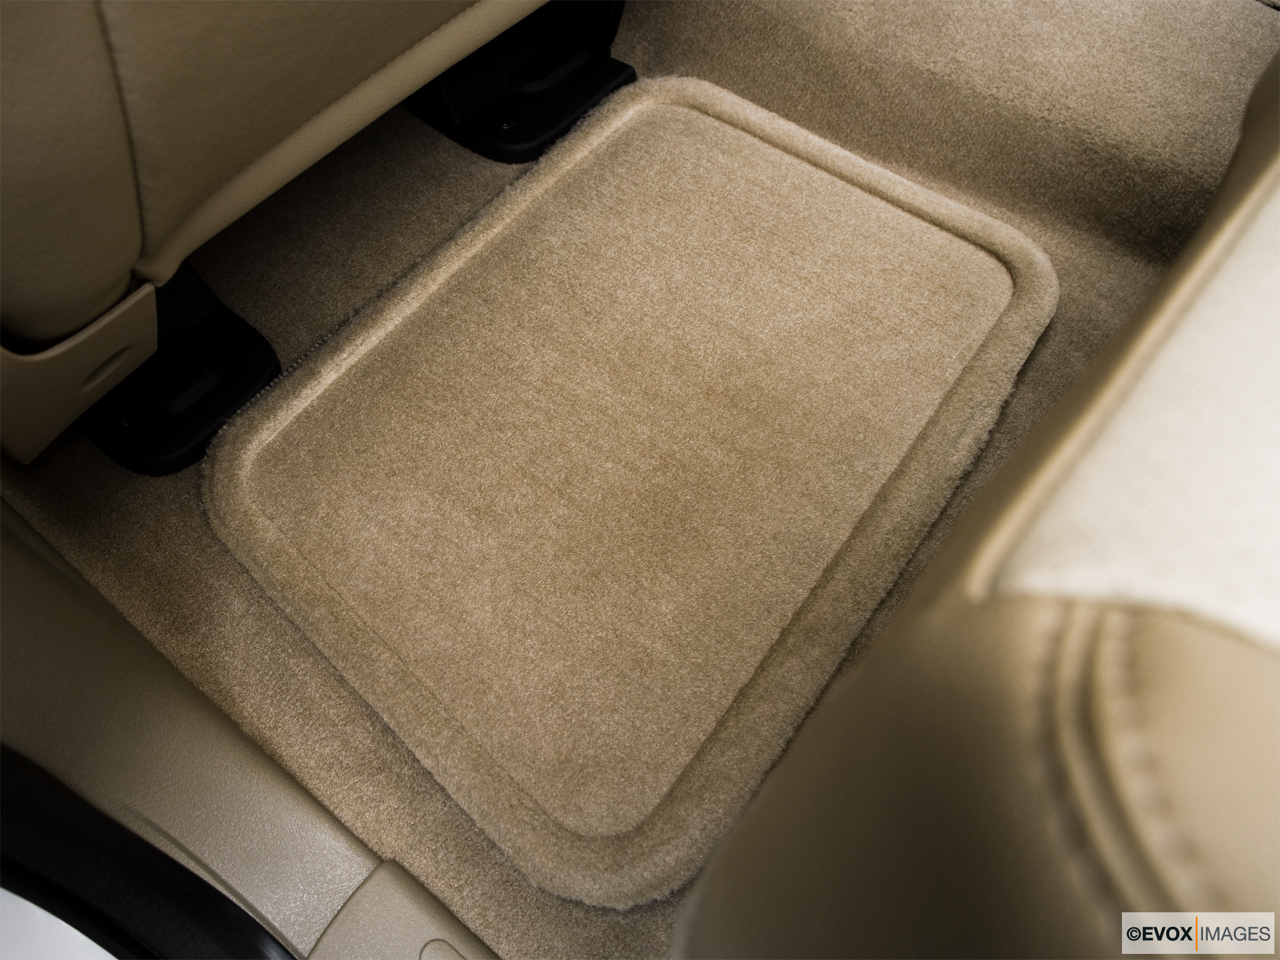 2010 Mercury Mountaineer Premier Rear driver's side floor mat. Mid-seat level from outside looking in. 